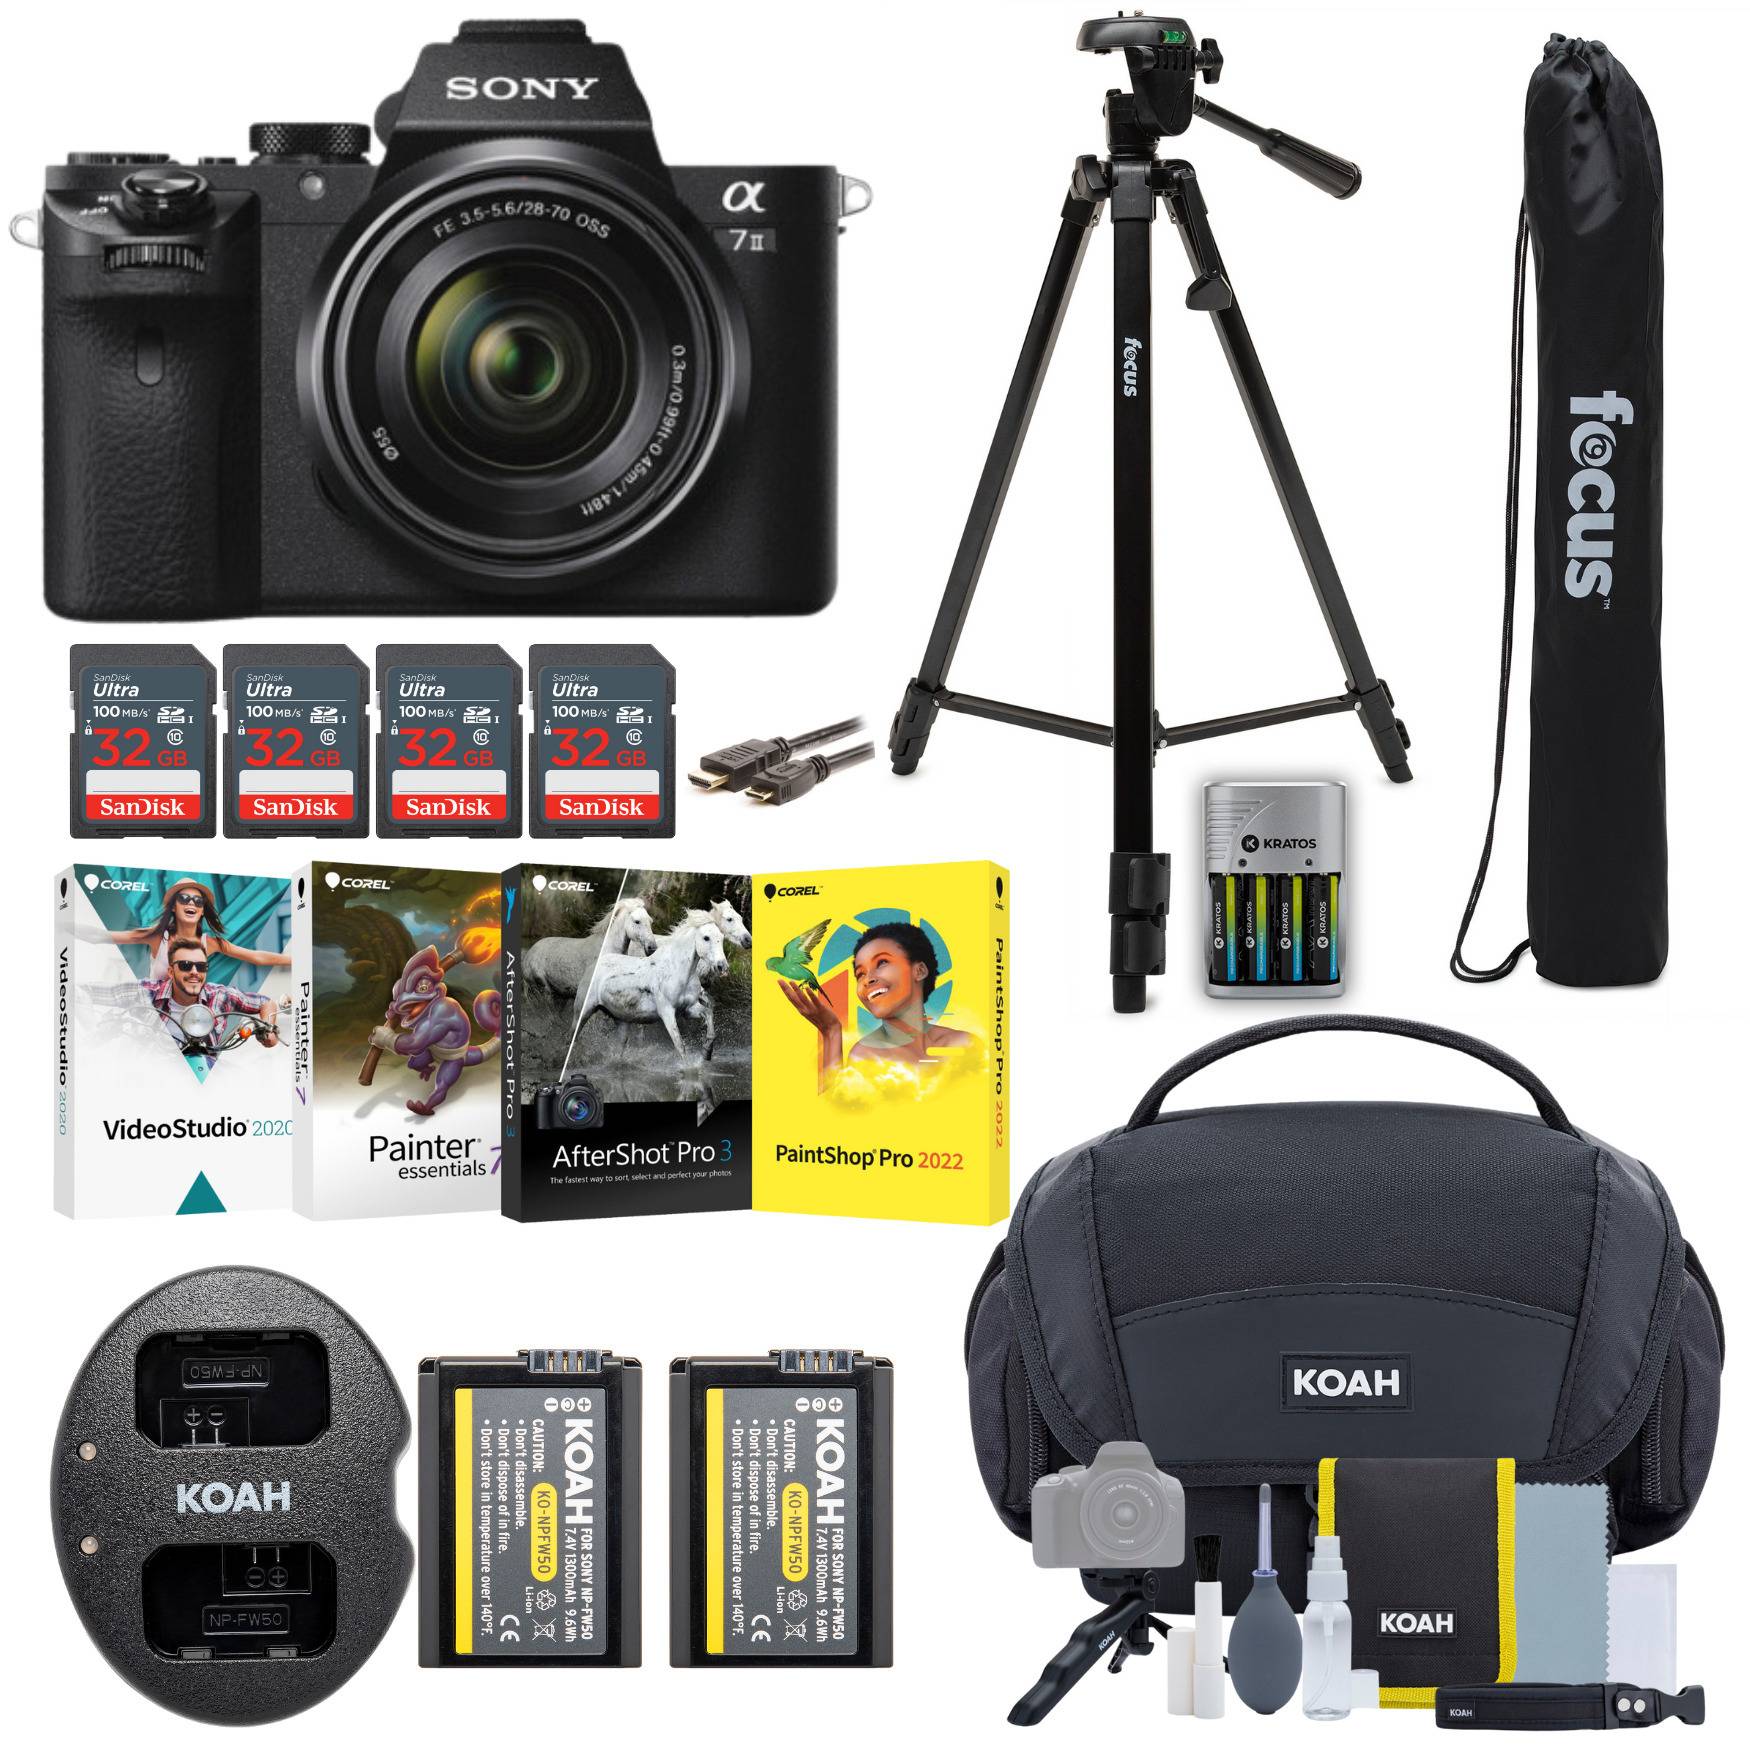 Sony Alpha a7II Mirrorless Digital Camera with 28-70mm f/3.5-5.6 Lens and Software Bundle